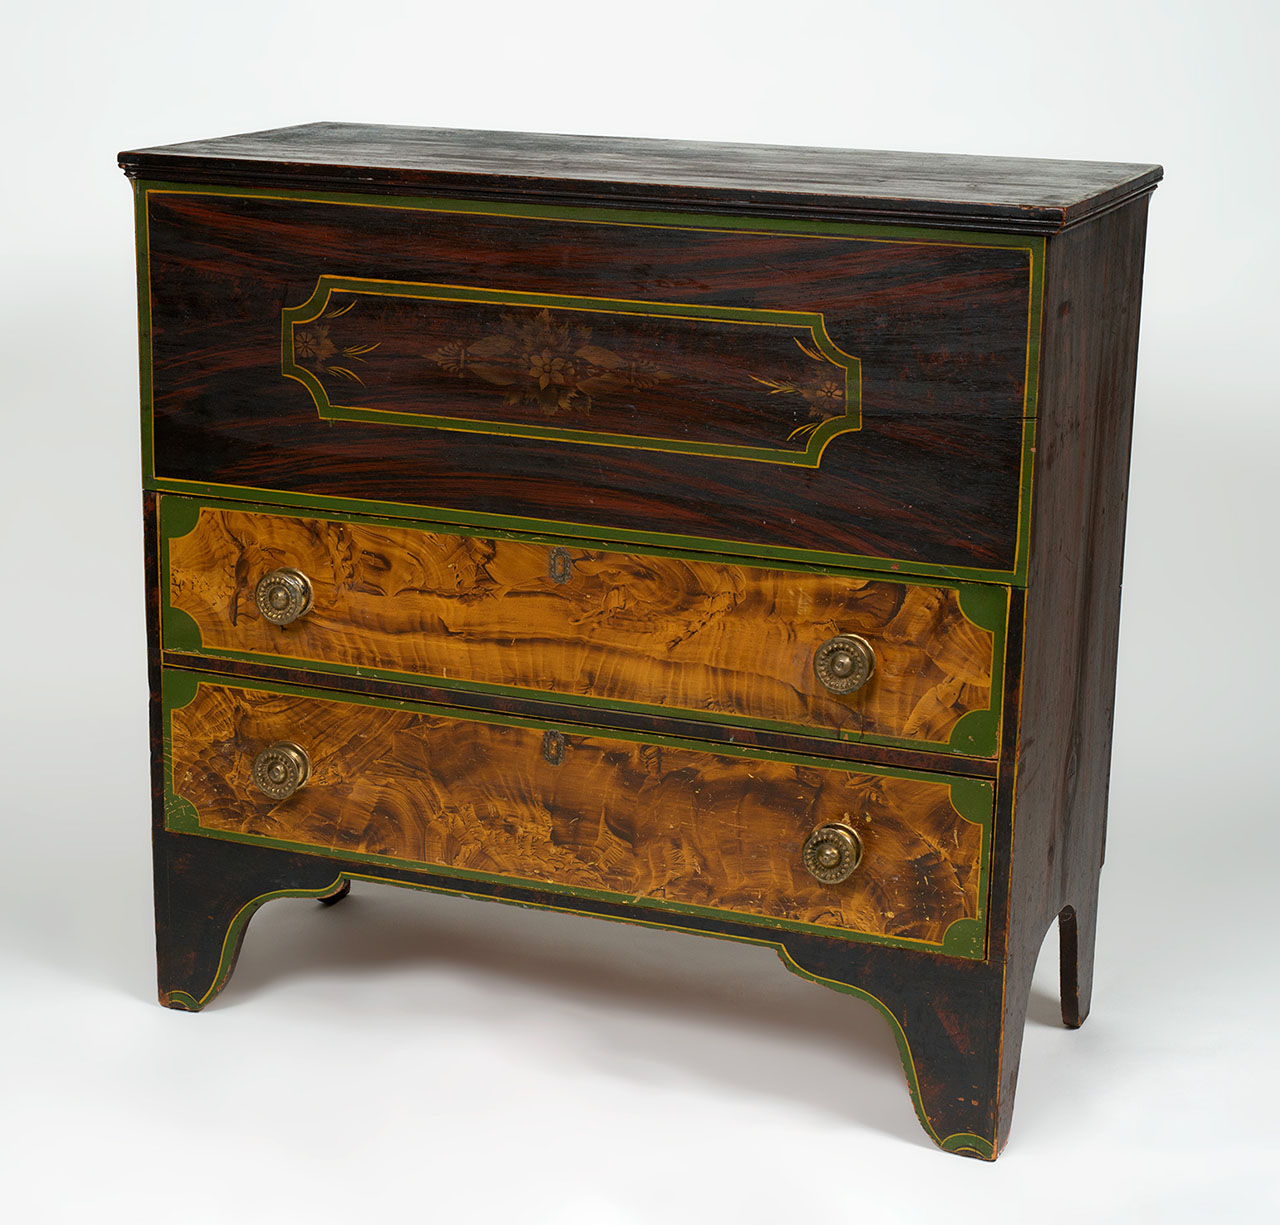 A very fine and rare painted and stenciled two drawer blanket chest